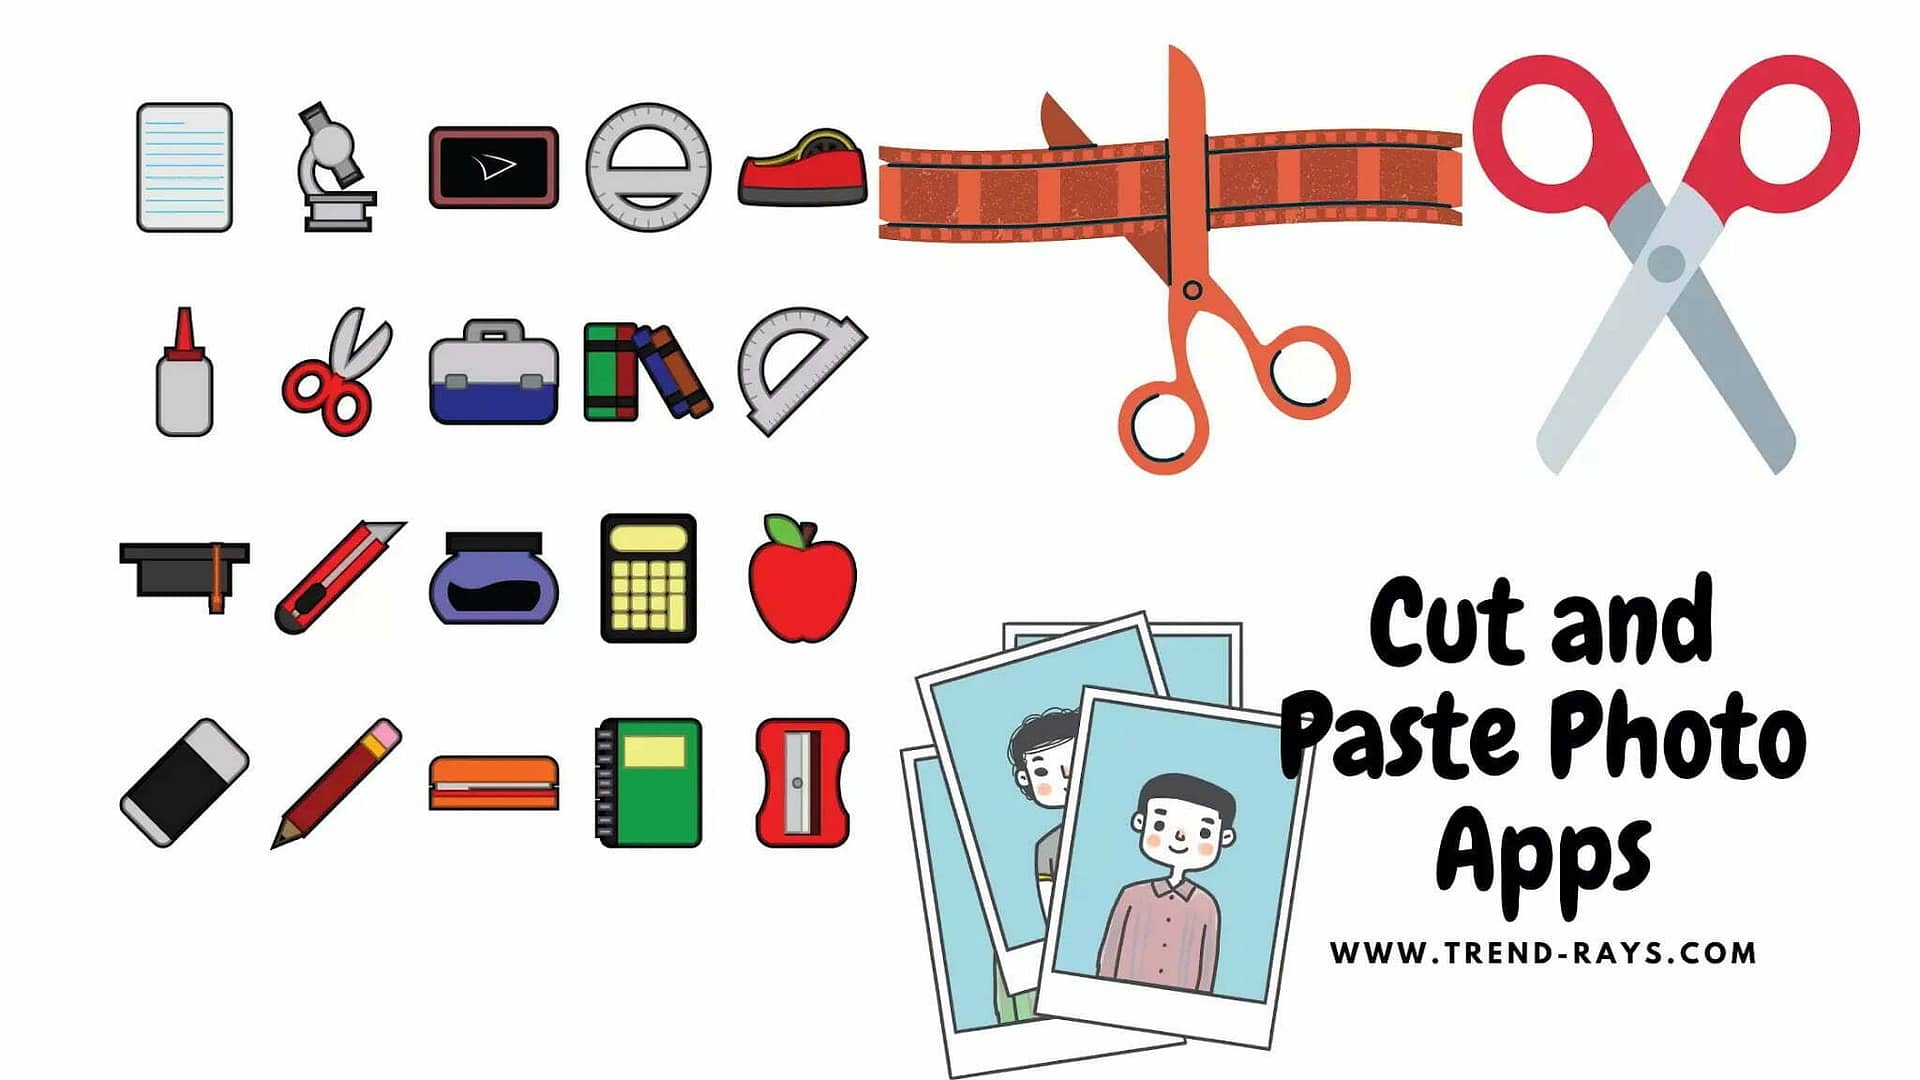 Cut and Paste Photo Apps